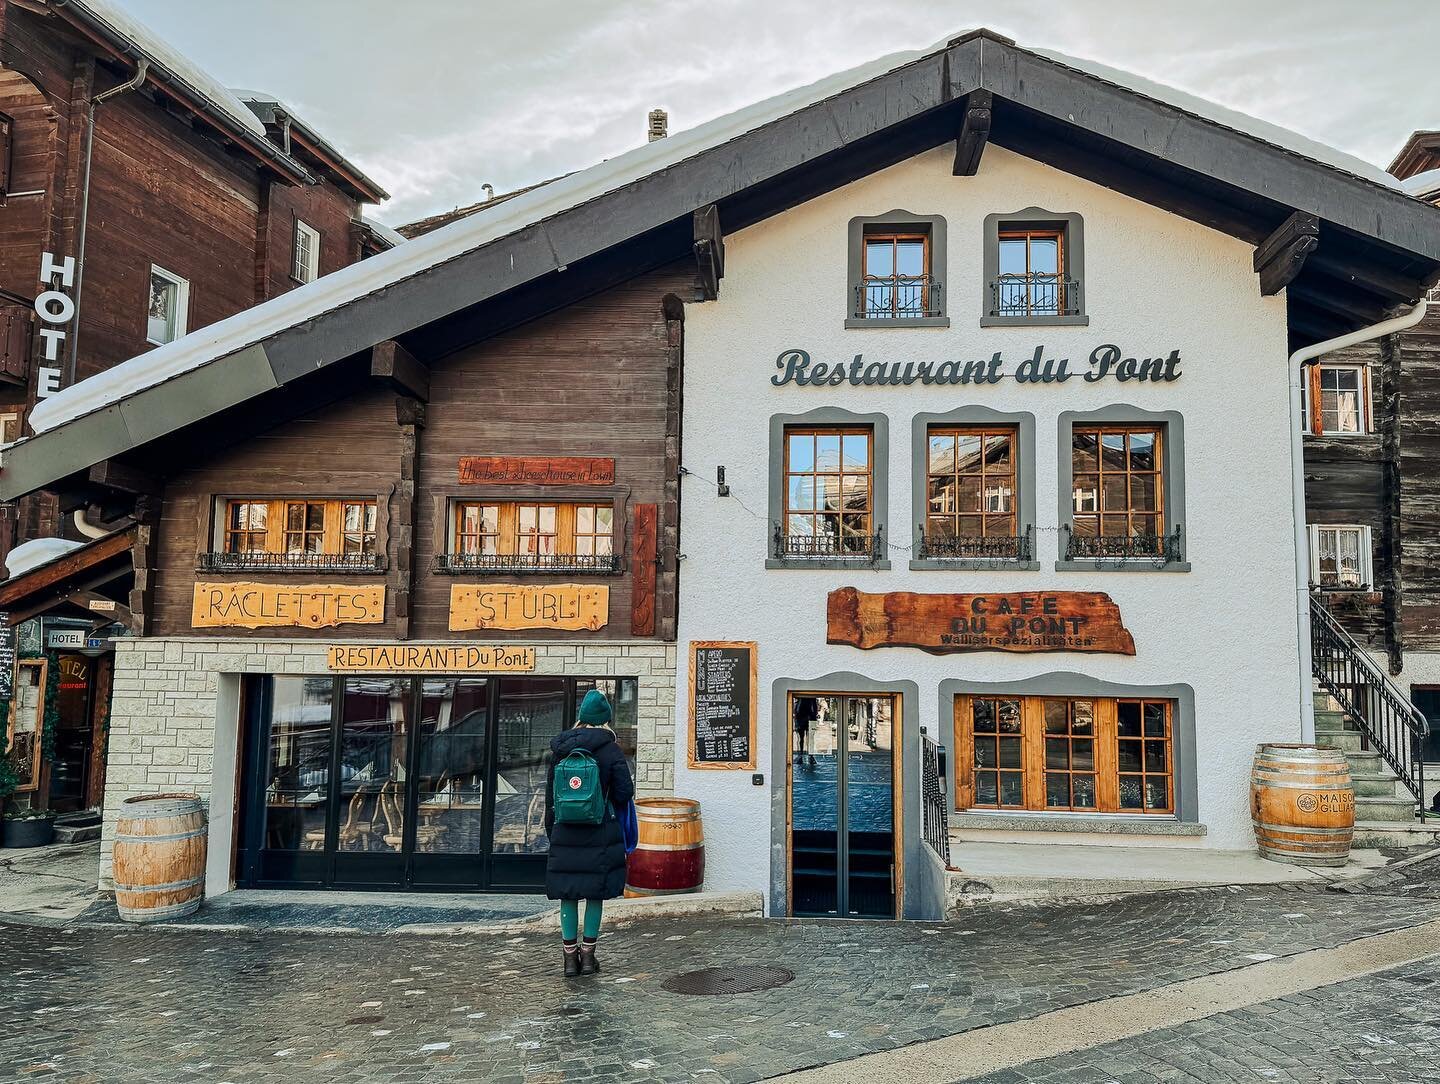 Taking in Village life in Zermatt 🏔️ 🫕 

A valley filled with Swiss Chalets, cobbled streets and restaurants serving locally produced Swiss cuisine - Zermatt village is like something straight out of a story book. 

The restaurants really are what 